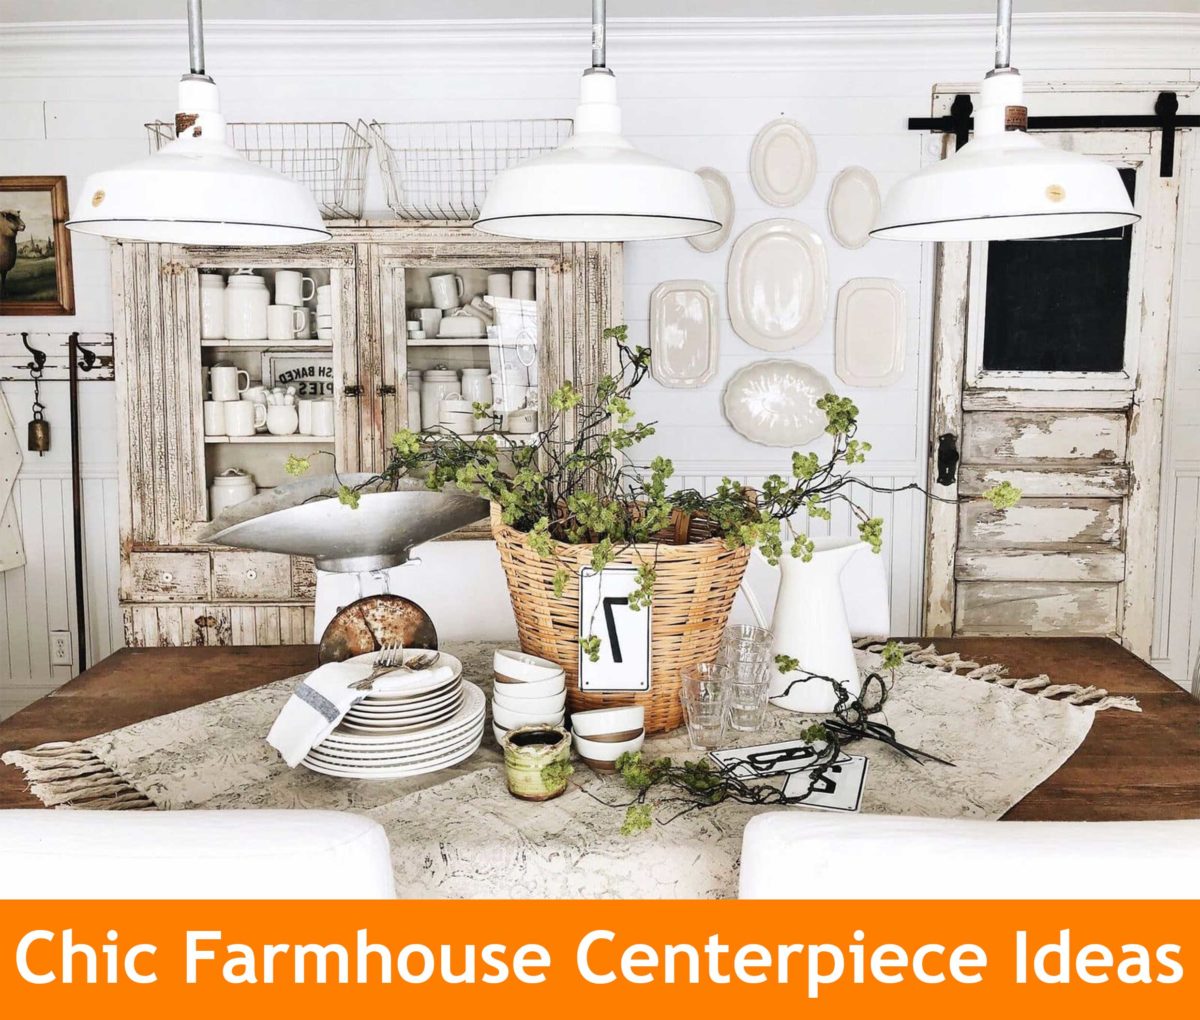 Everything You Need to Know About Chic Farmhouse Centerpiece Ideas